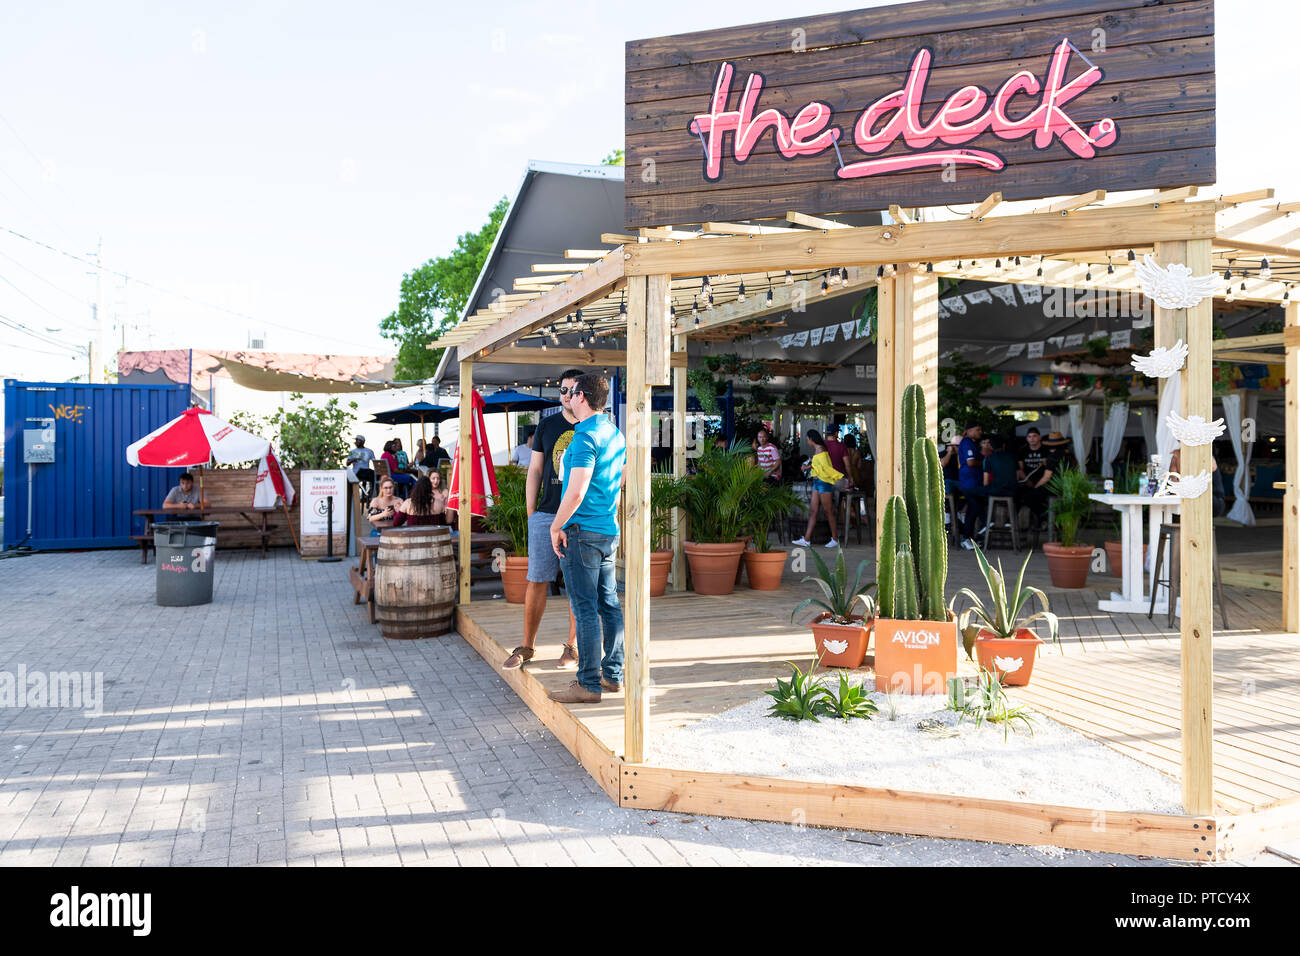 Miami, USA - May 6, 2018: The Deck bar, night club, restaurant with live music in Wynwood art district during summer, sunny weather on street Stock Photo